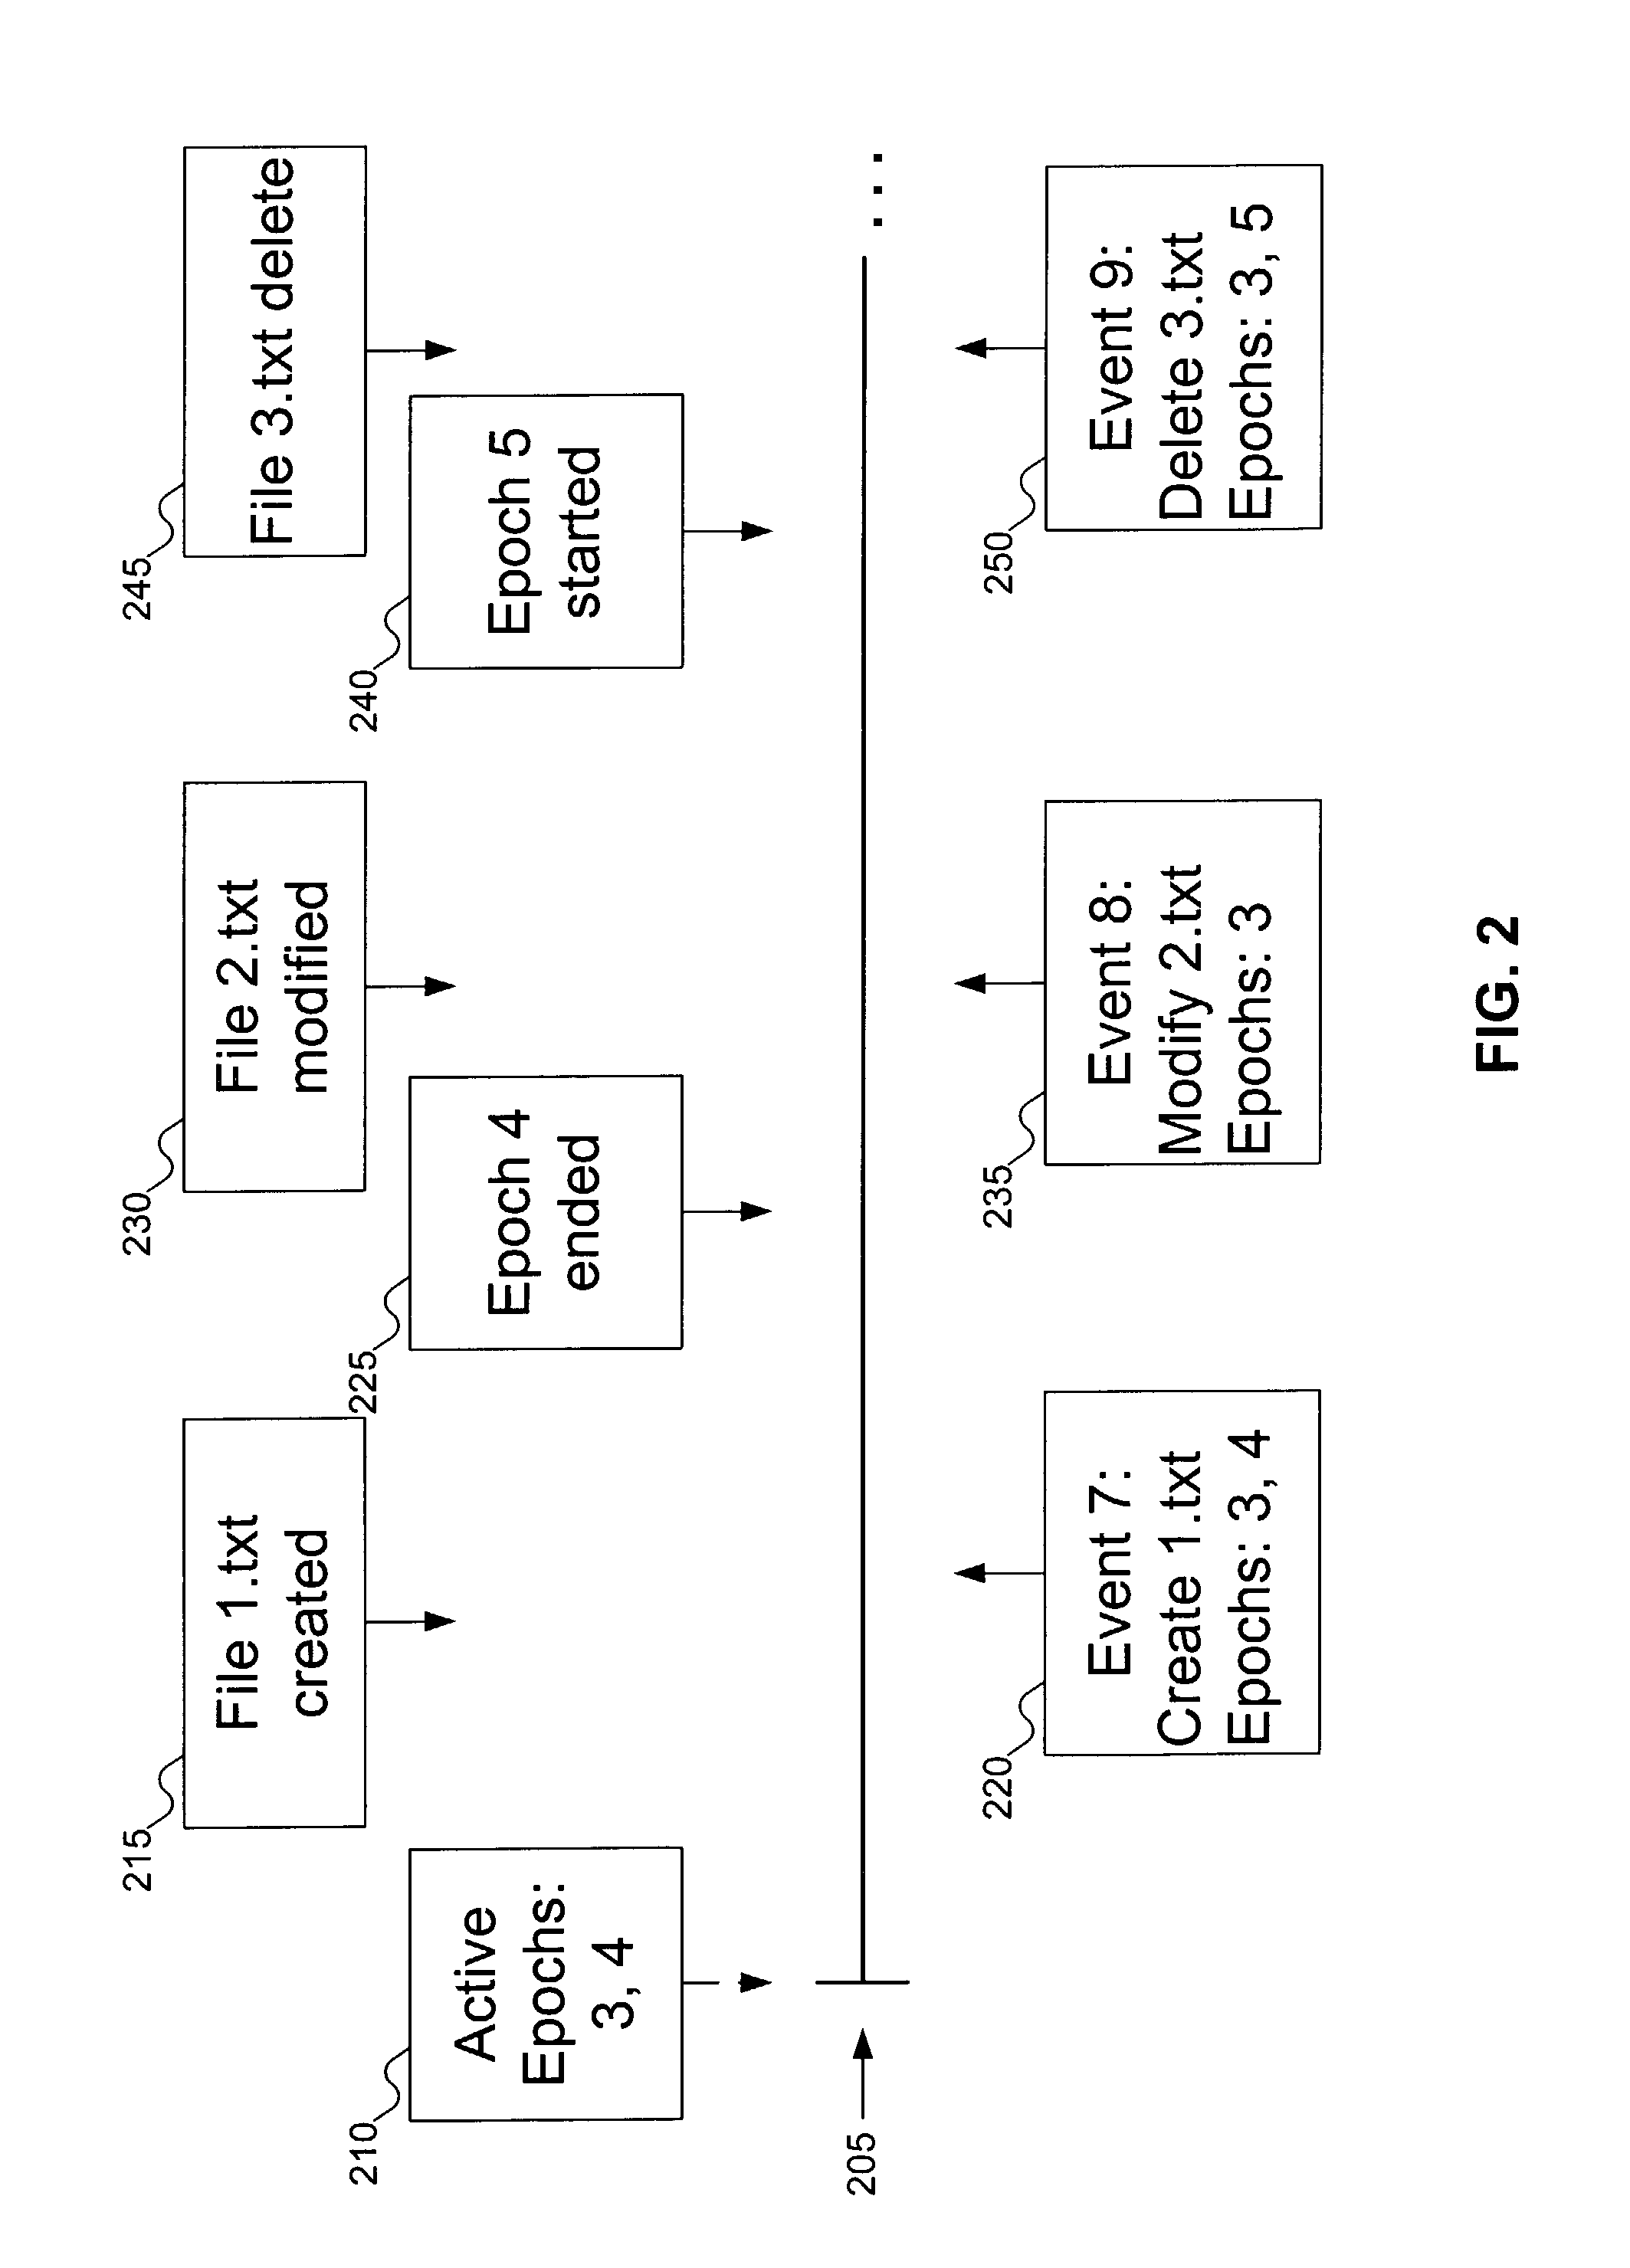 Multi-epoch method for saving and exporting file system events